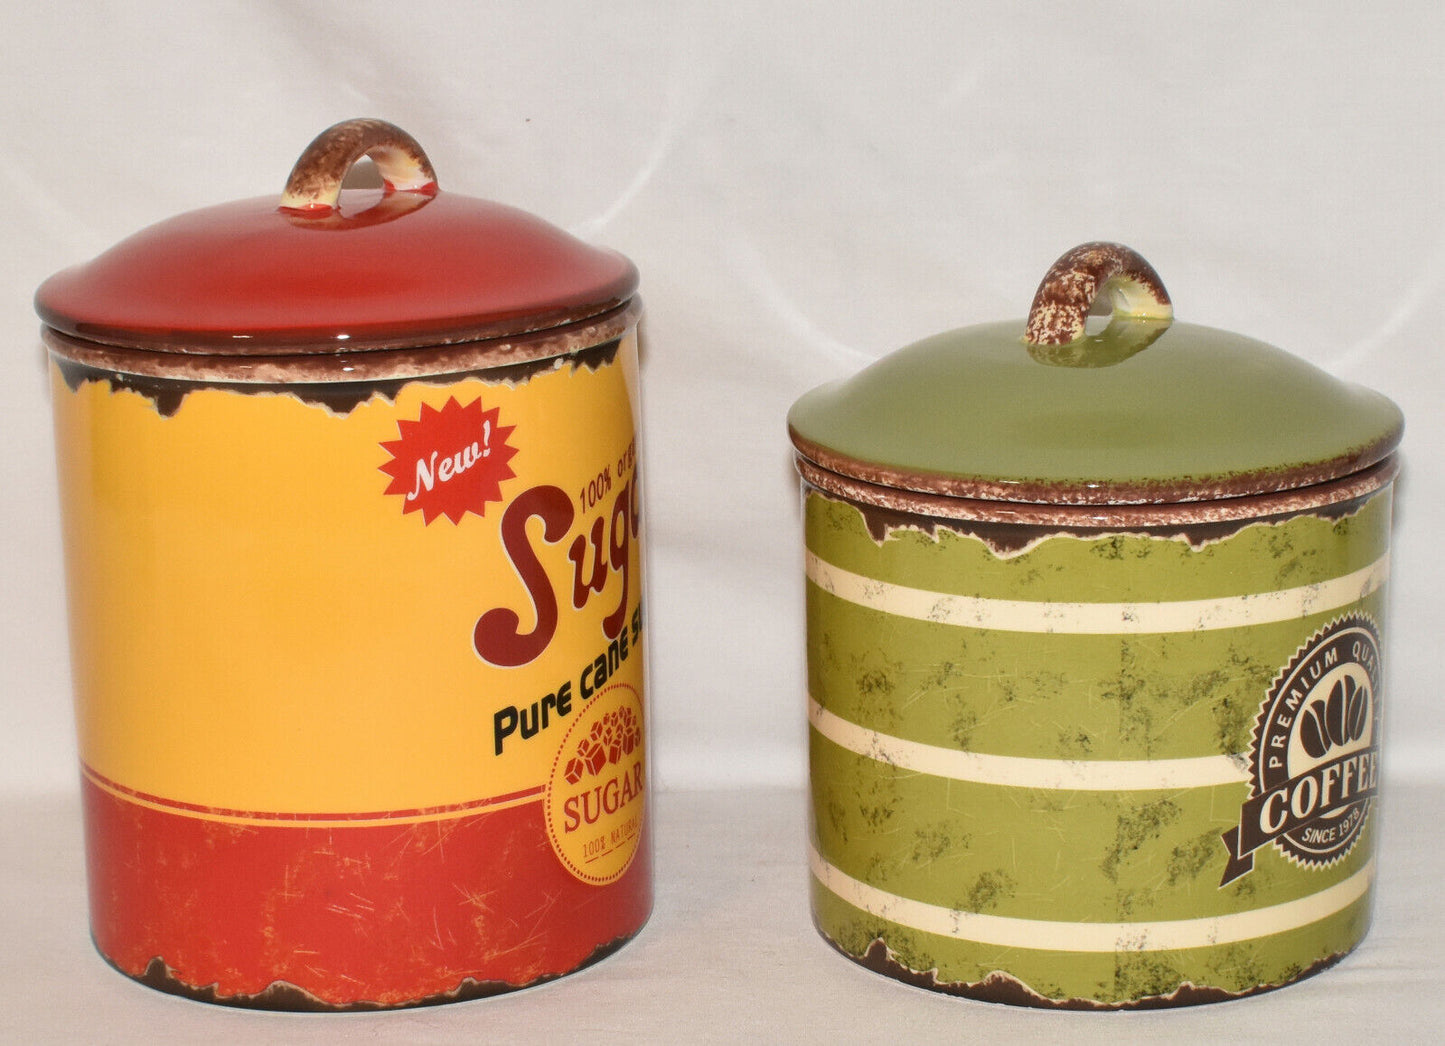 2pc Set Retro Canisters Sugar Coffee Ceramic Canisters w/ Vintage Graphics New